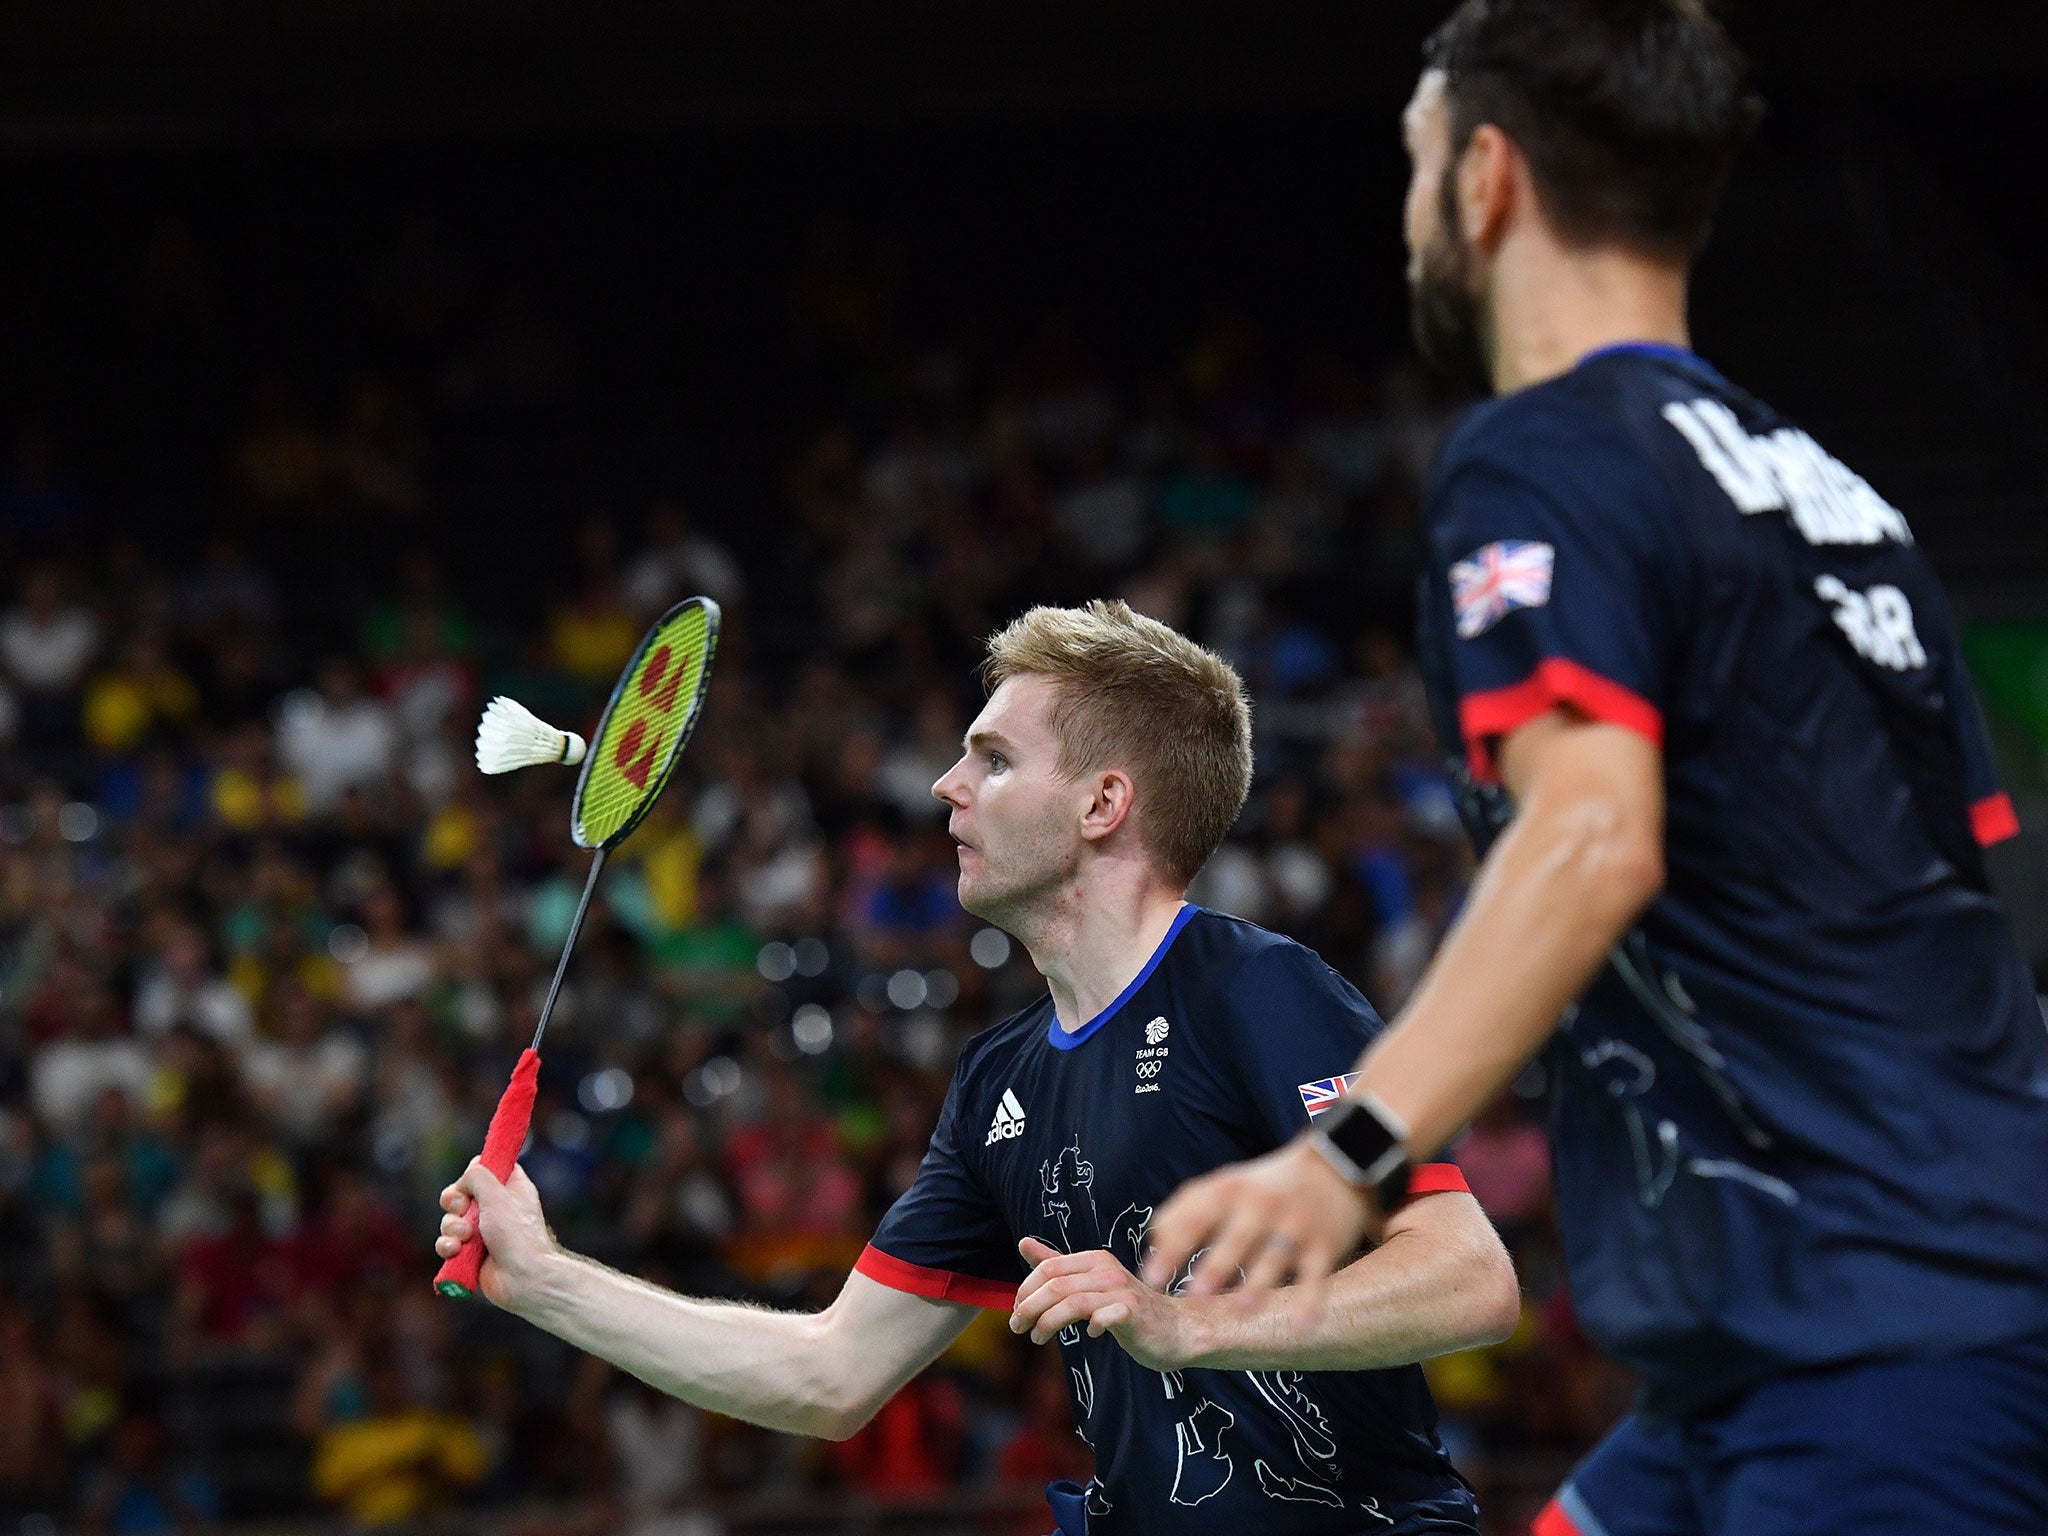 Chris Langridge and Marcus Ellis in action at the Rio Olympics in the Men's Badminton Doubles